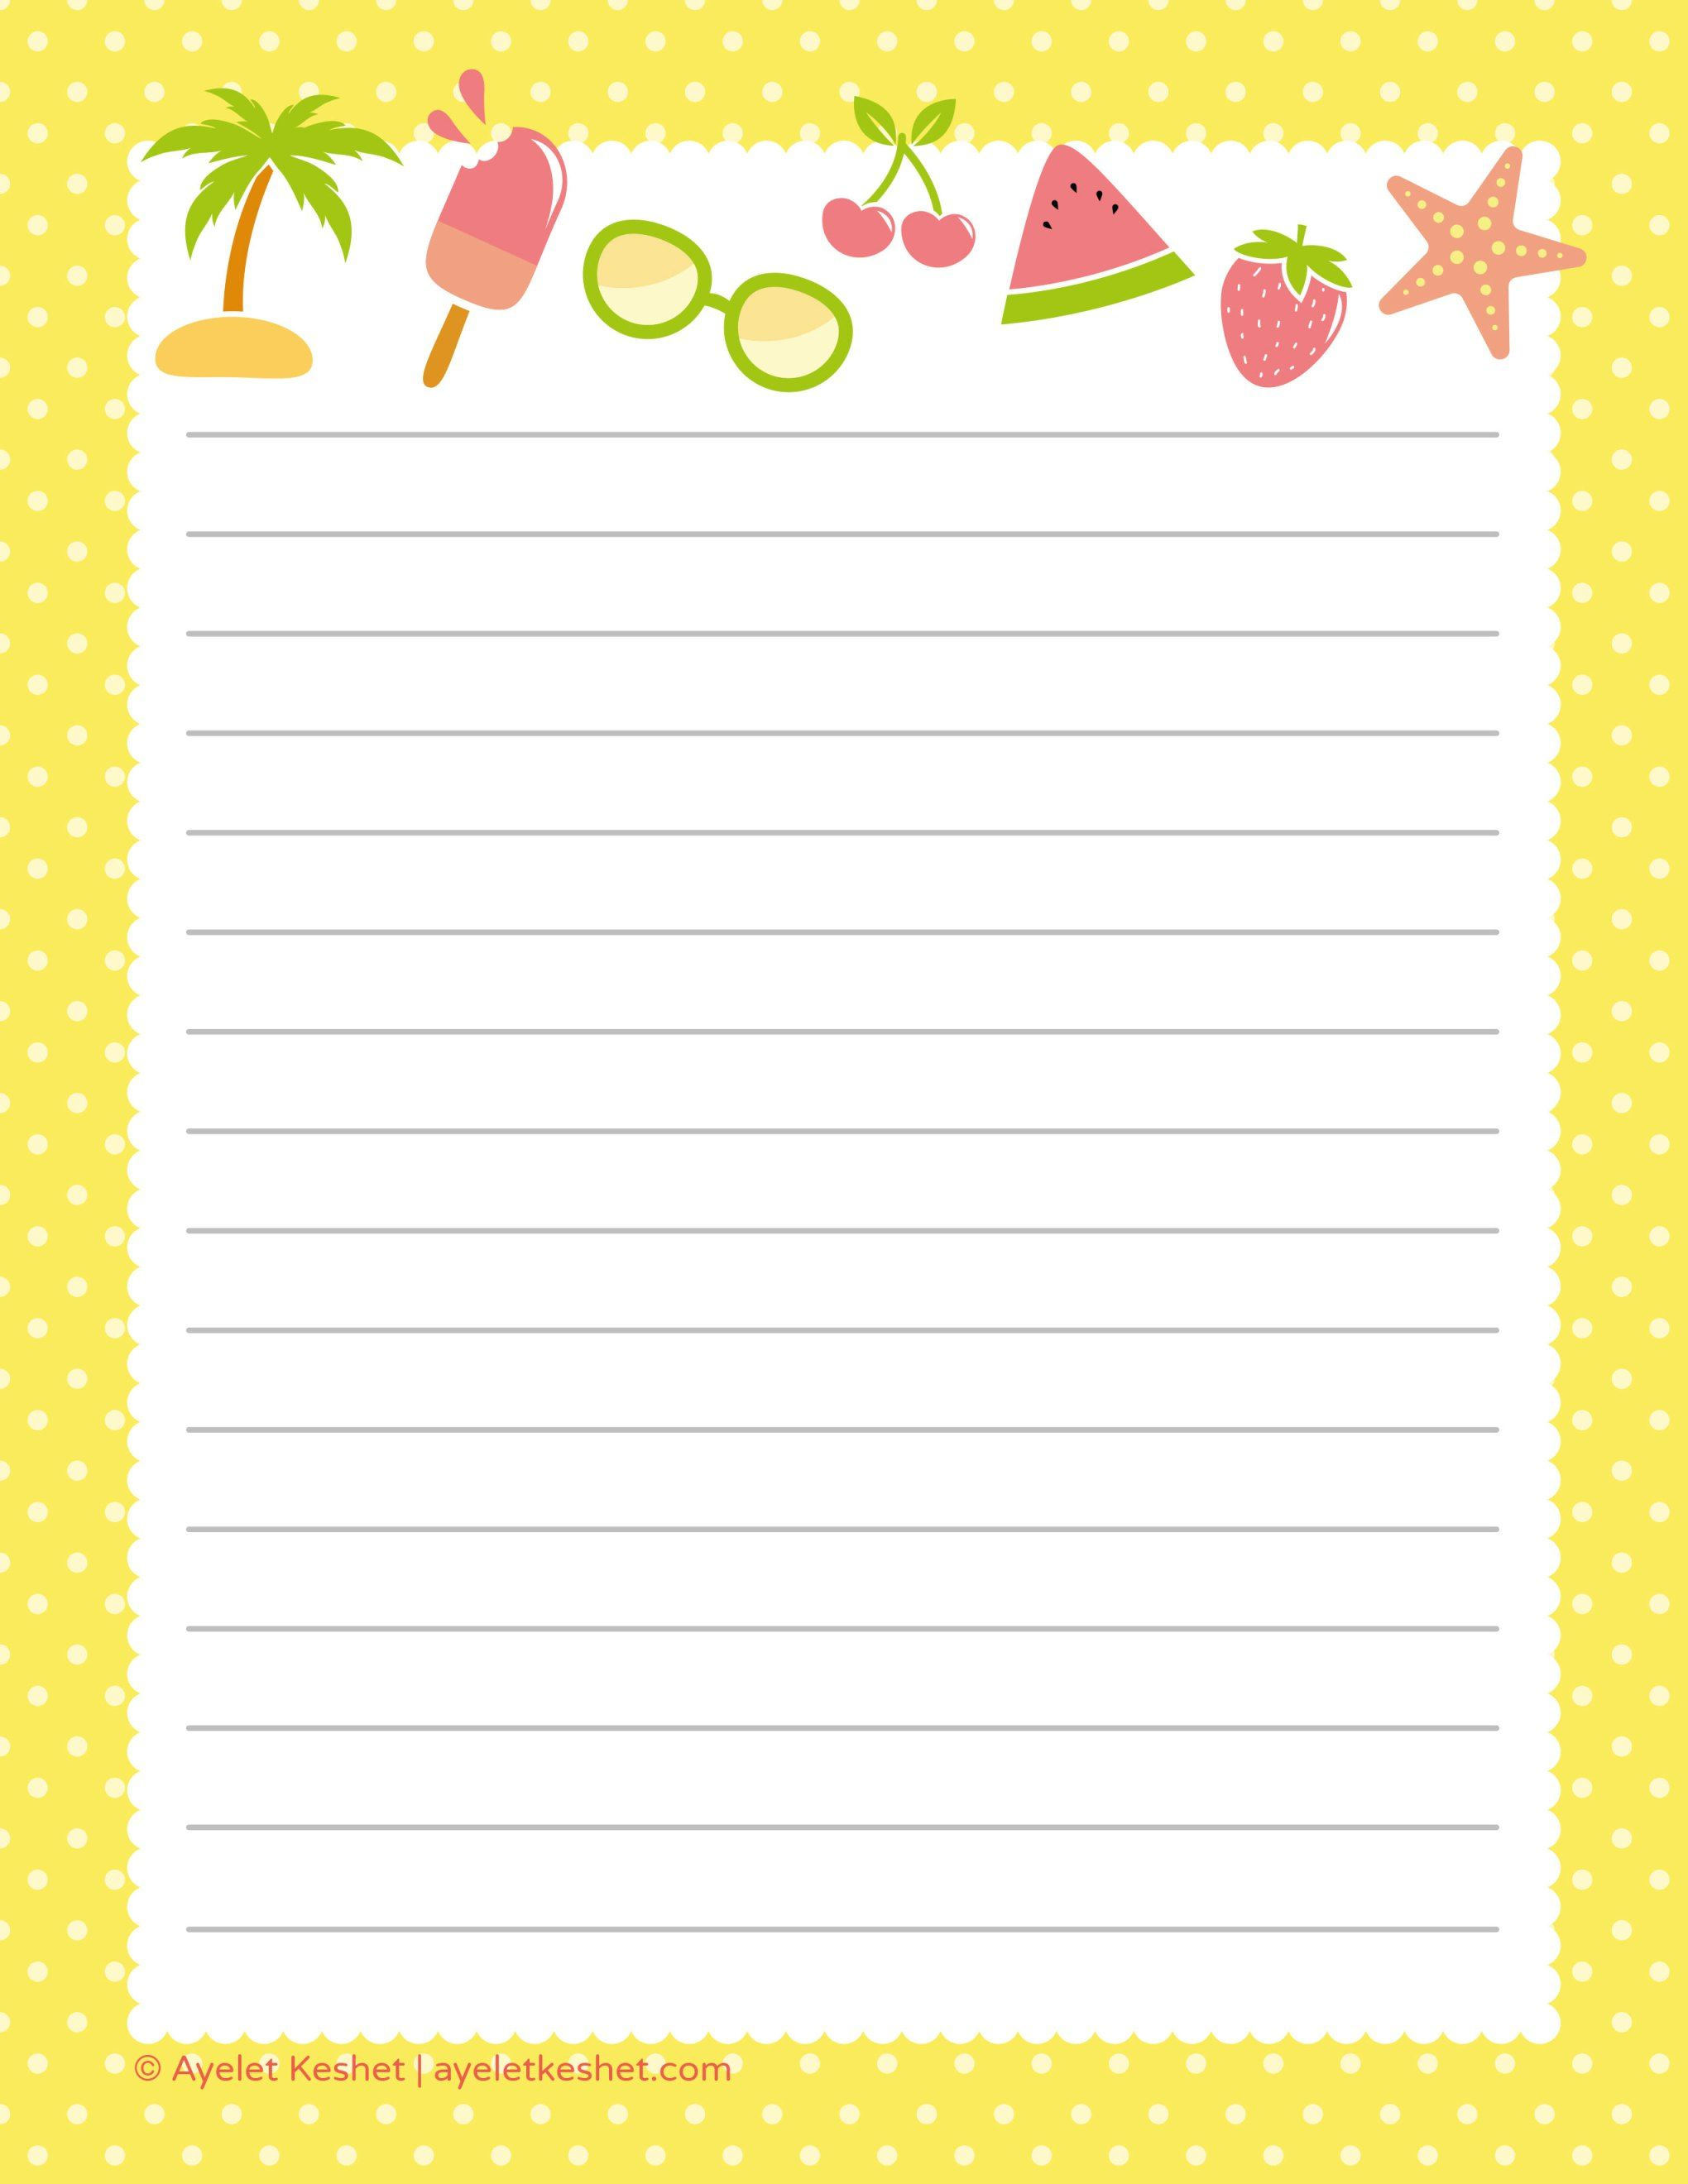 Free Printable Letter Paper | Printables To Go | Pinterest - Free Printable Writing Paper